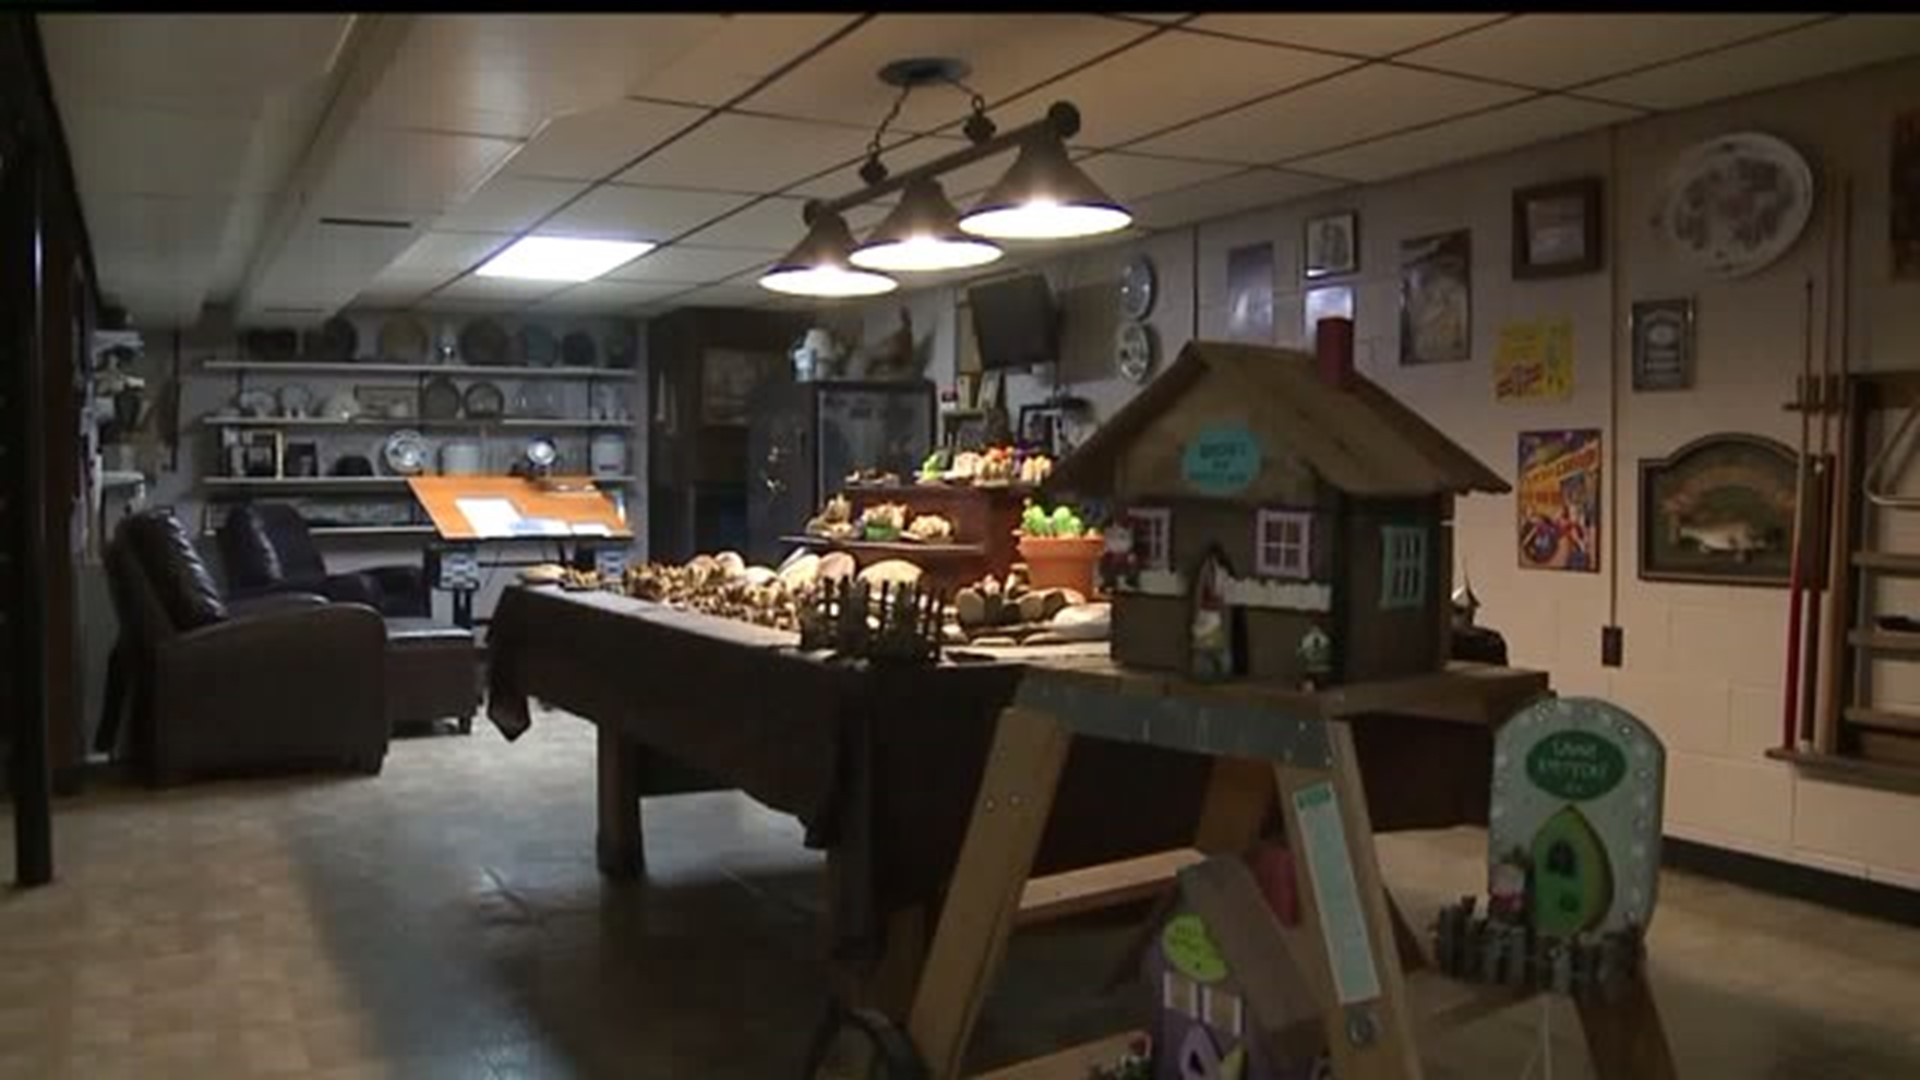 Retired hobbyist finds new places for "gnome sweet home"